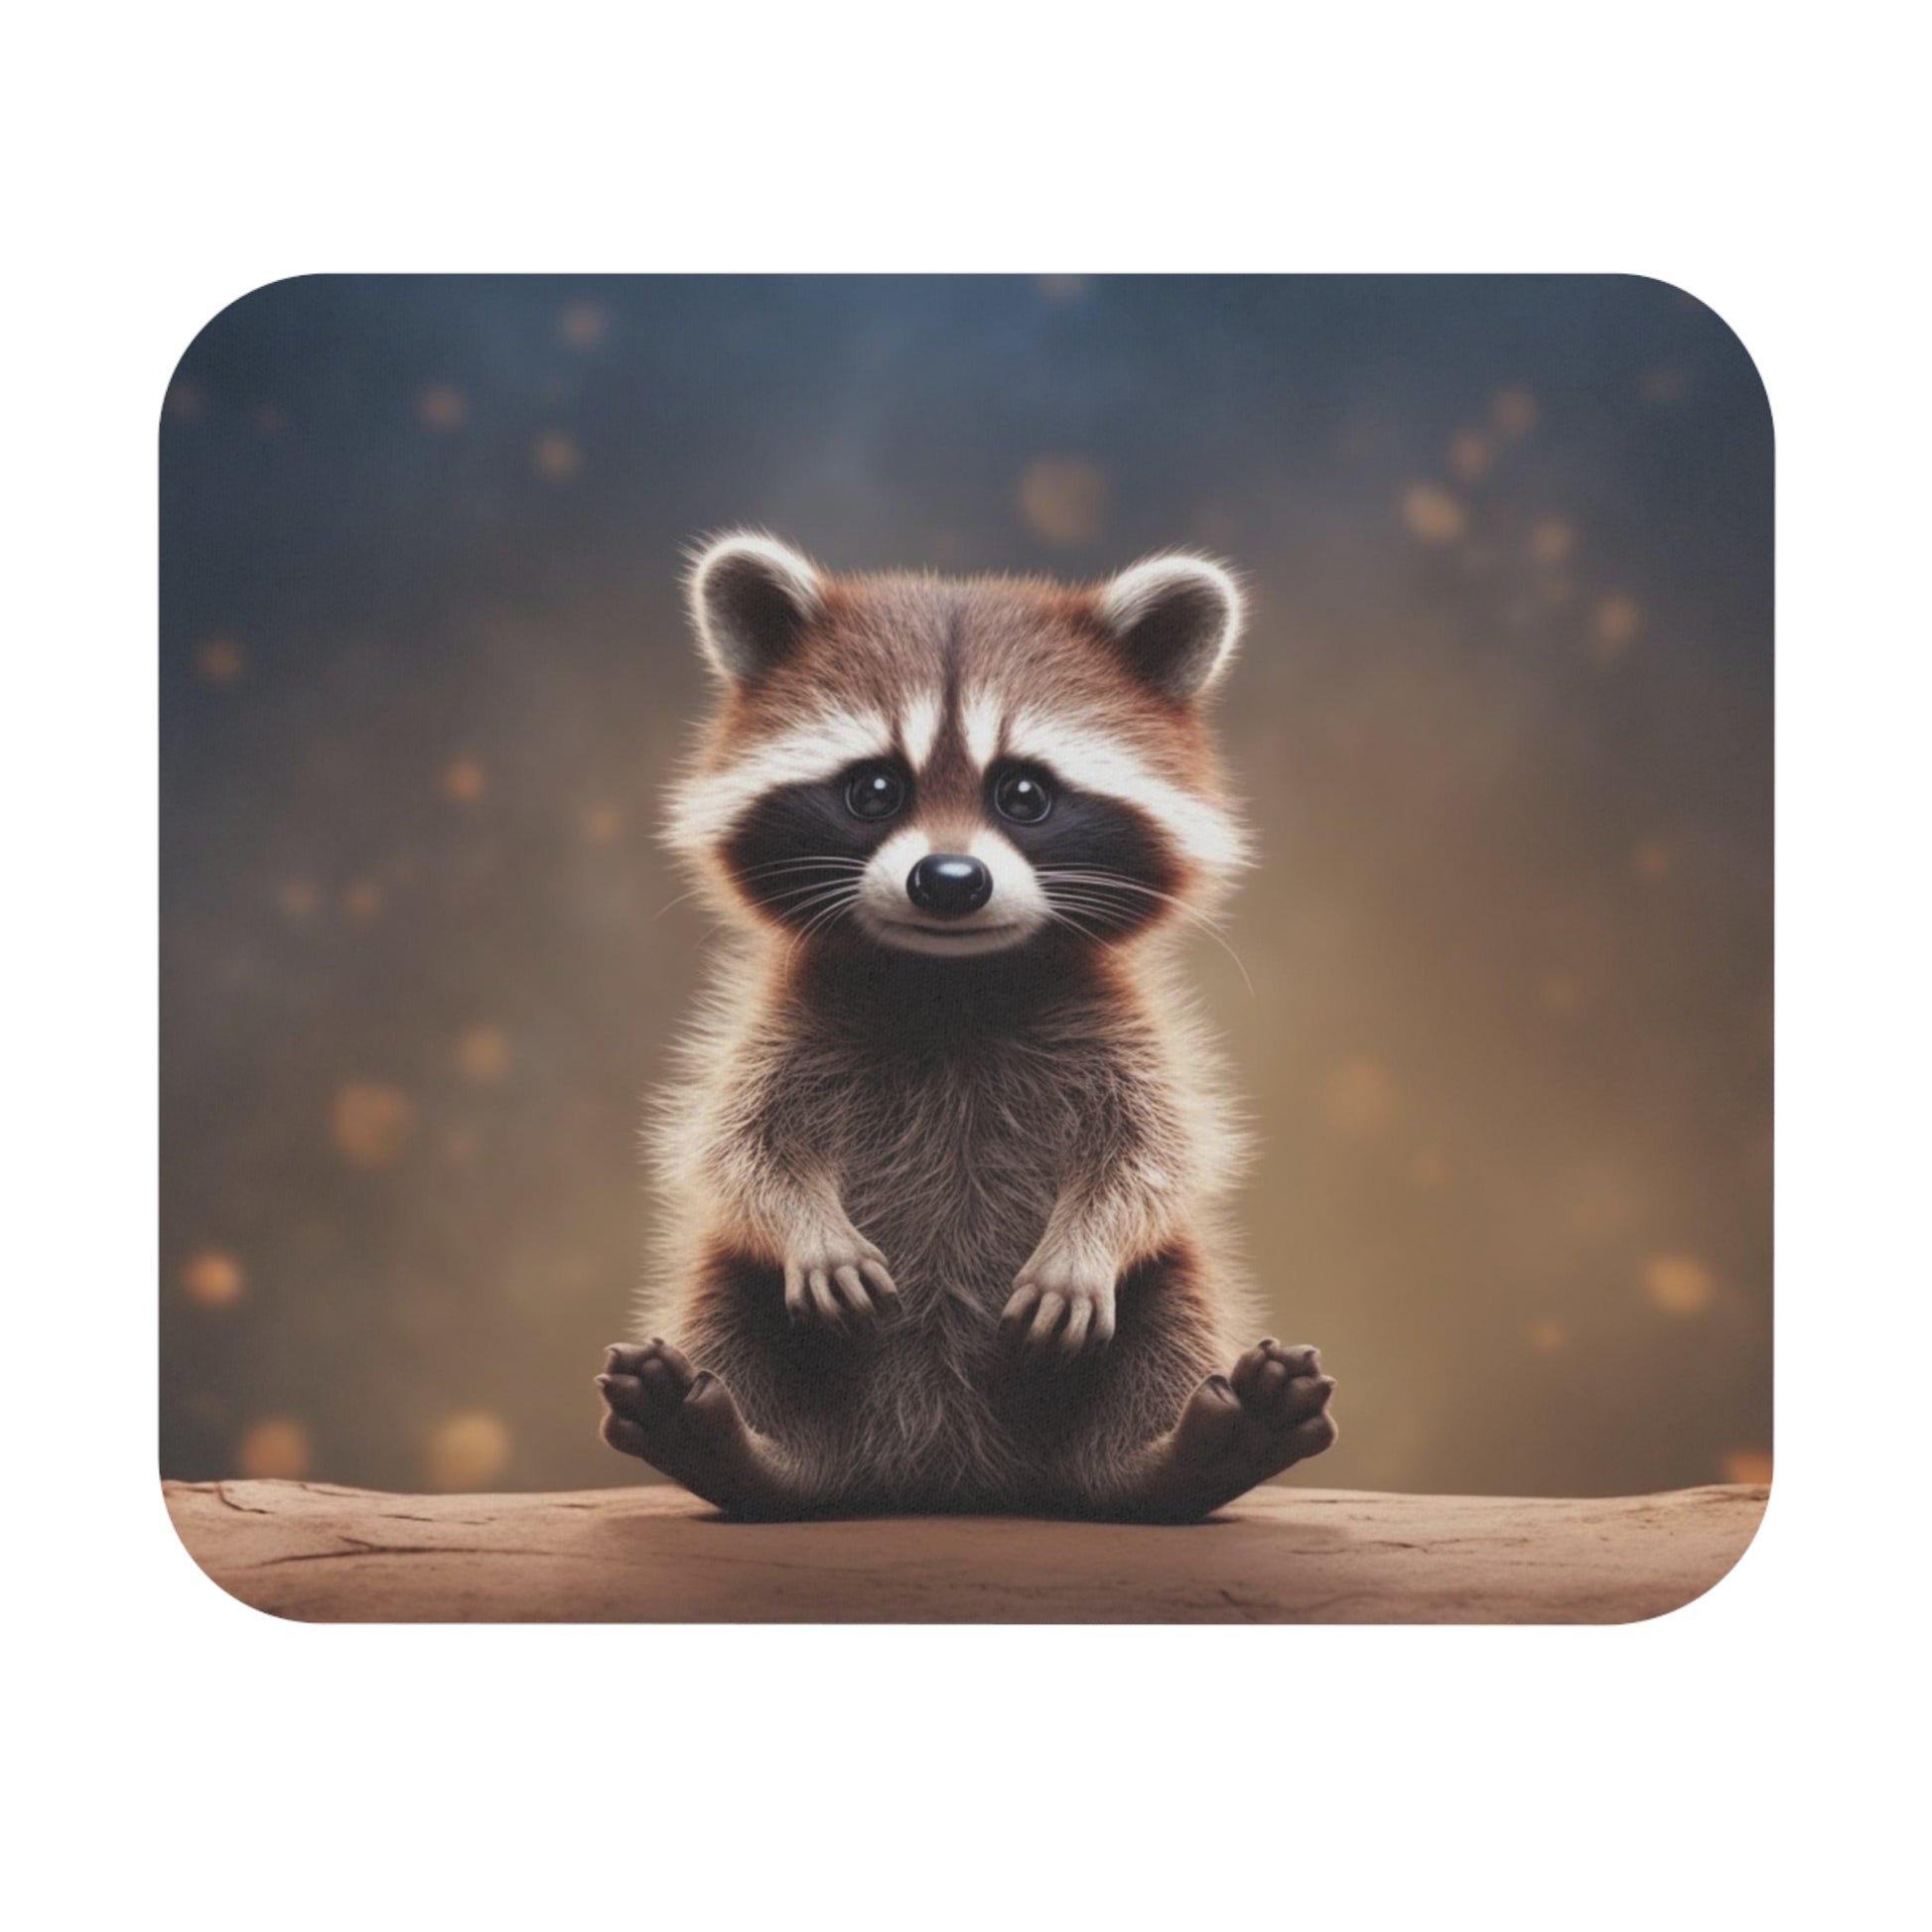 Cute Raccoon Mouse Pad, Animal Computer Gaming Unique Desk Cool Decorative Aesthetic Design Square Mat Starcove Fashion